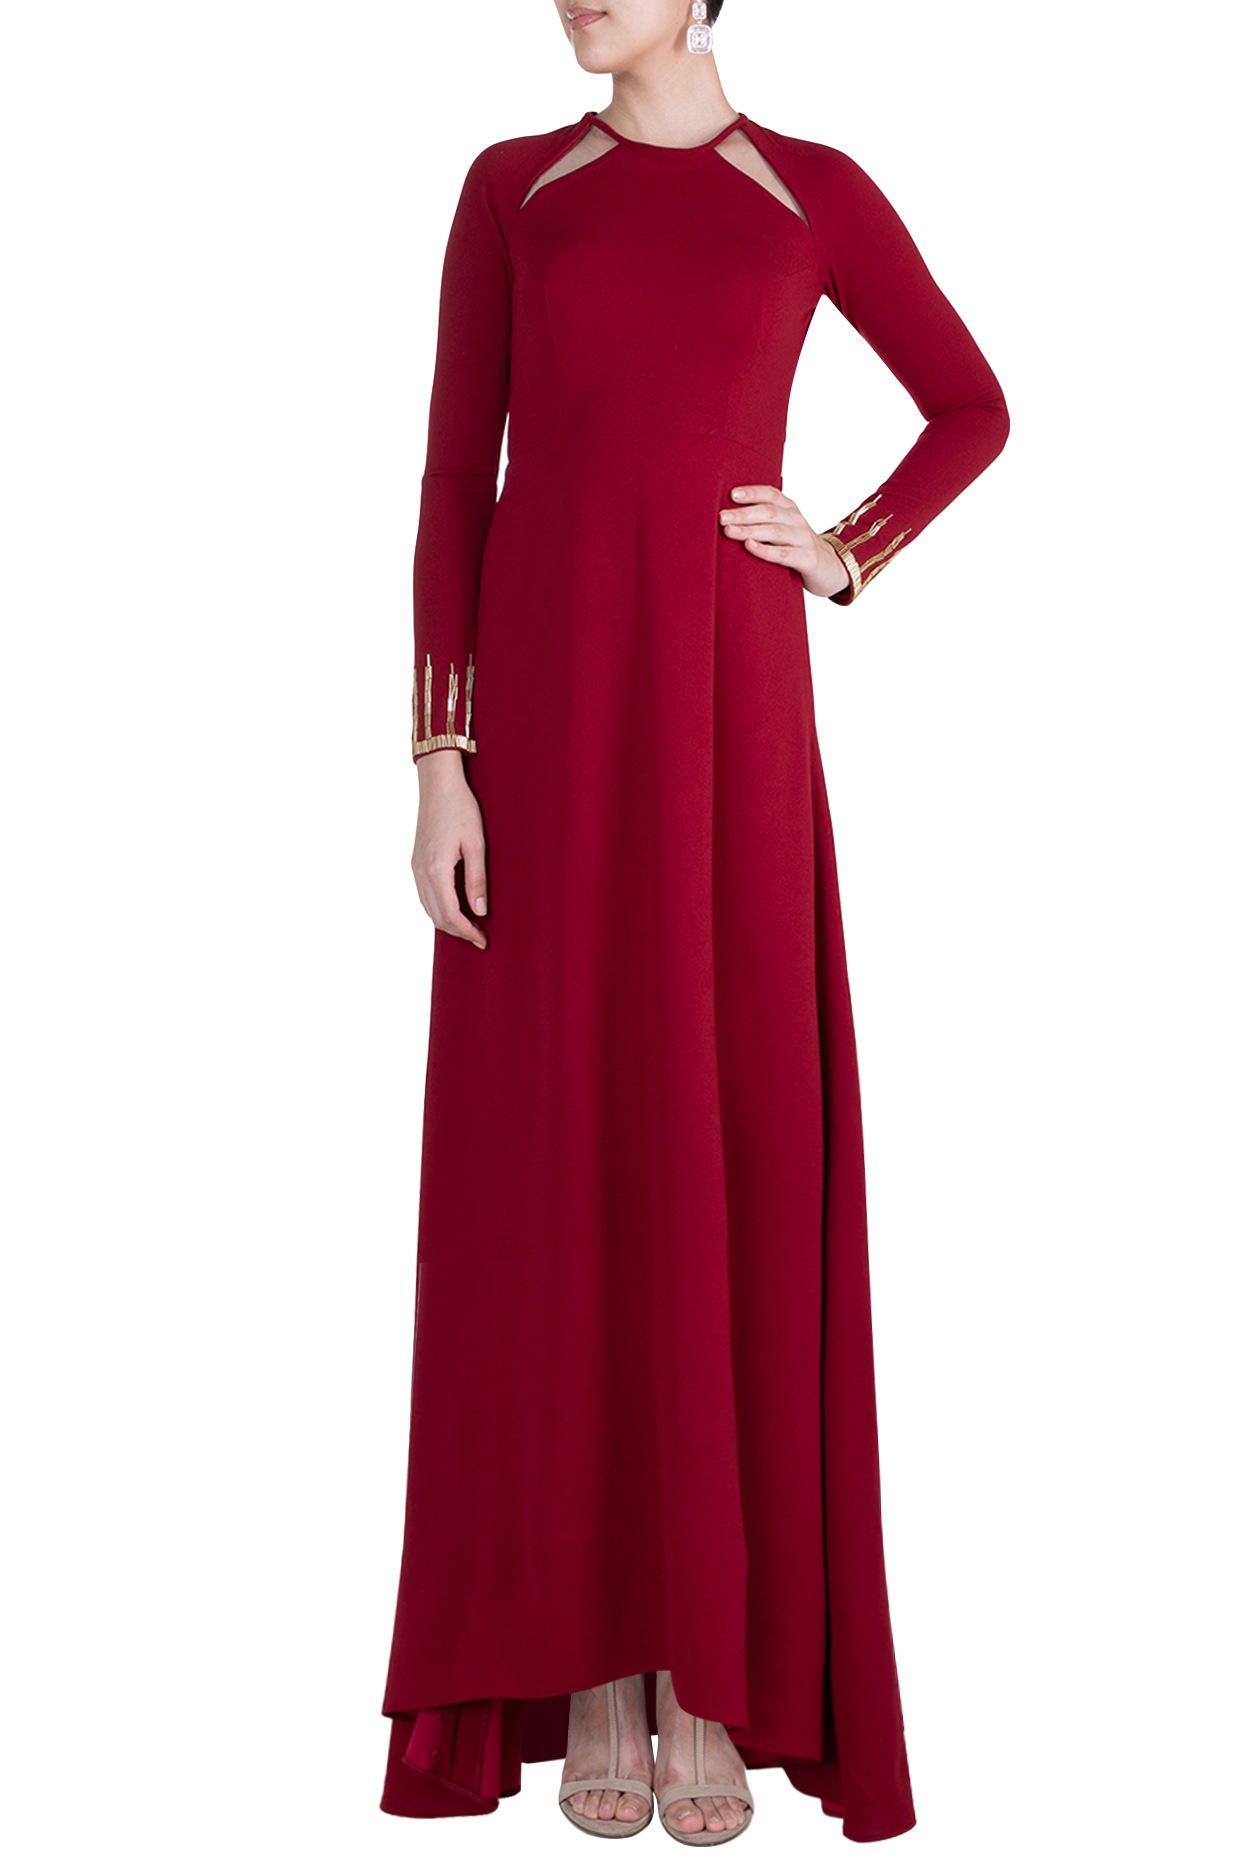 Maroon Indian Gown- Buy Maroon Color Gown Online at Best Price